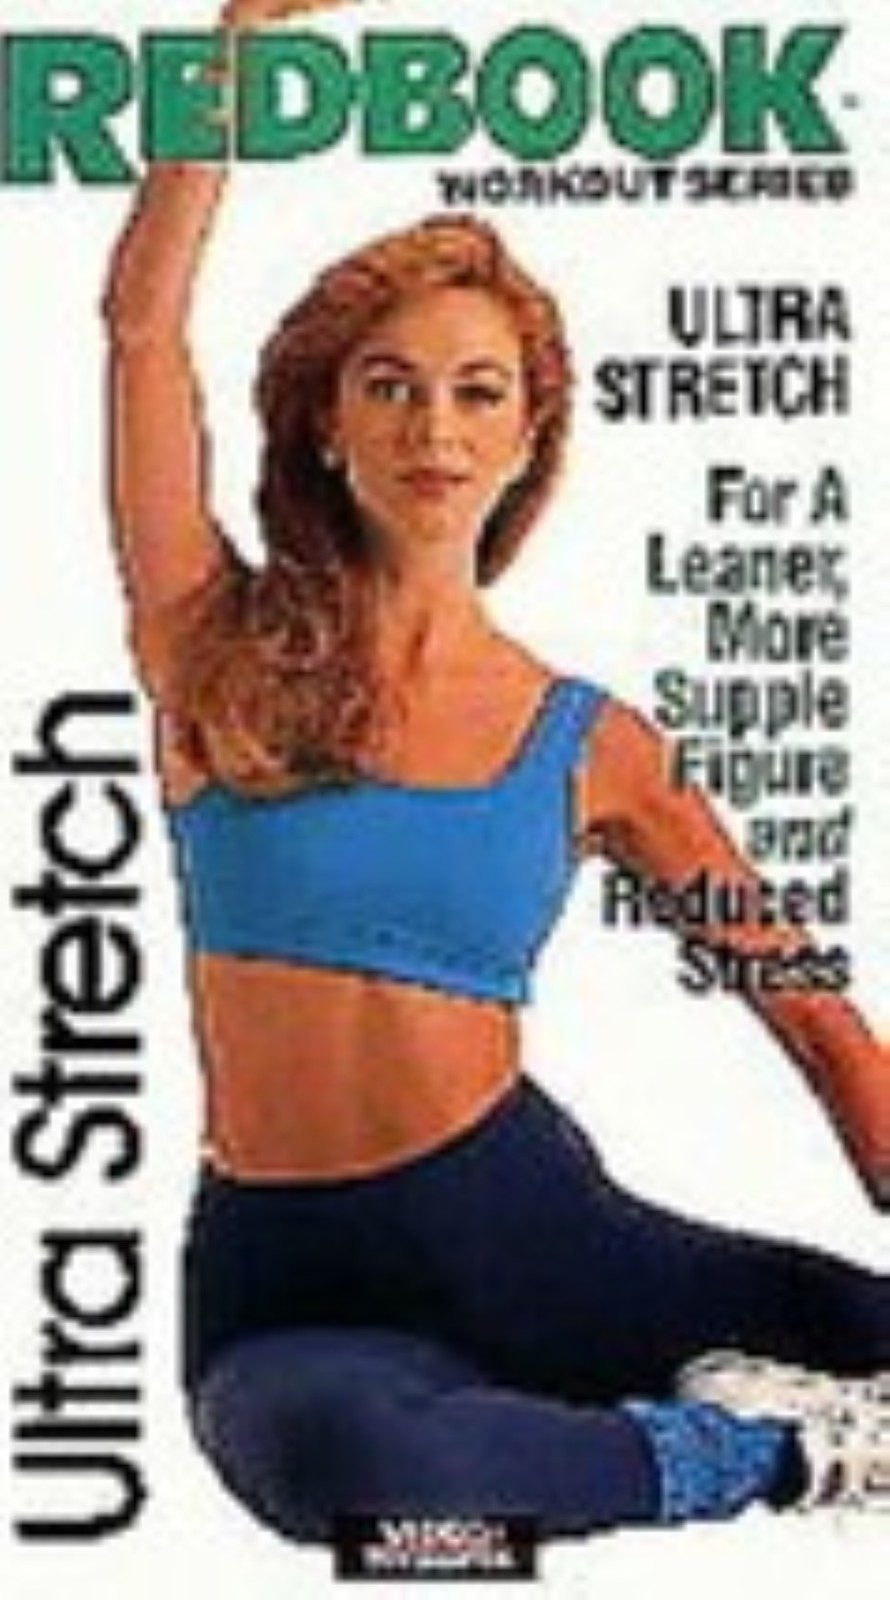 Redbook workout series ultra stretch  large 